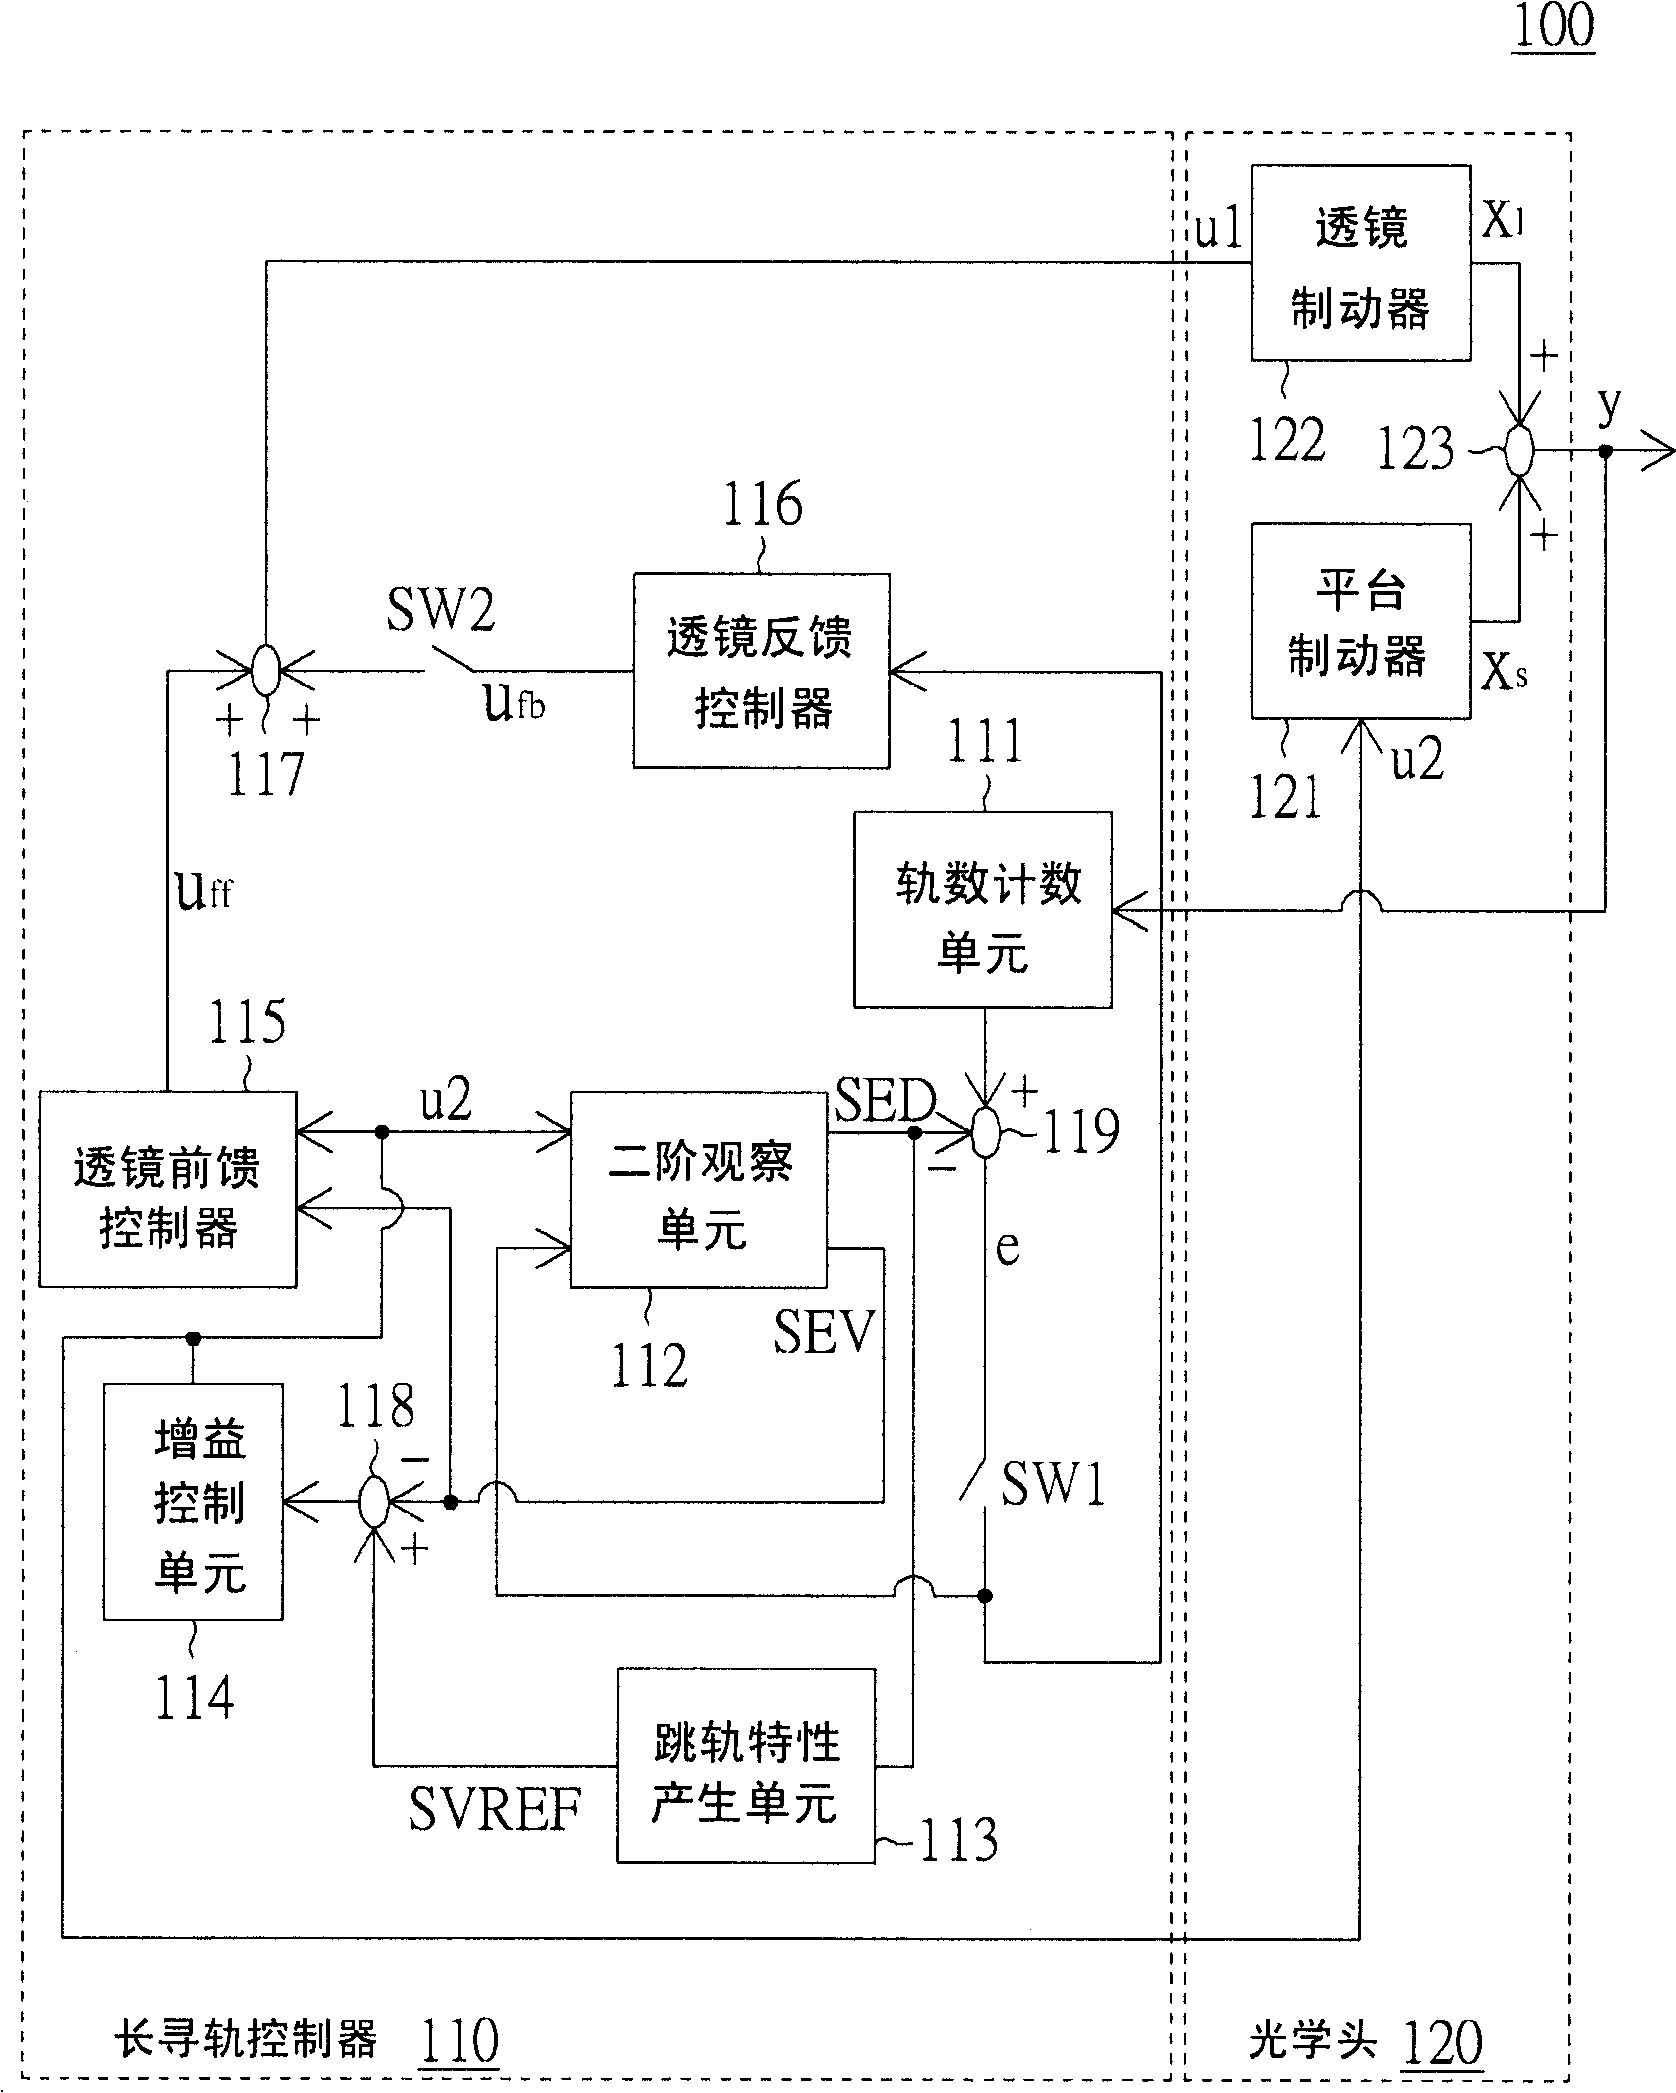 Long-distance trace seeking control system and method for optical information regenerating and recording system